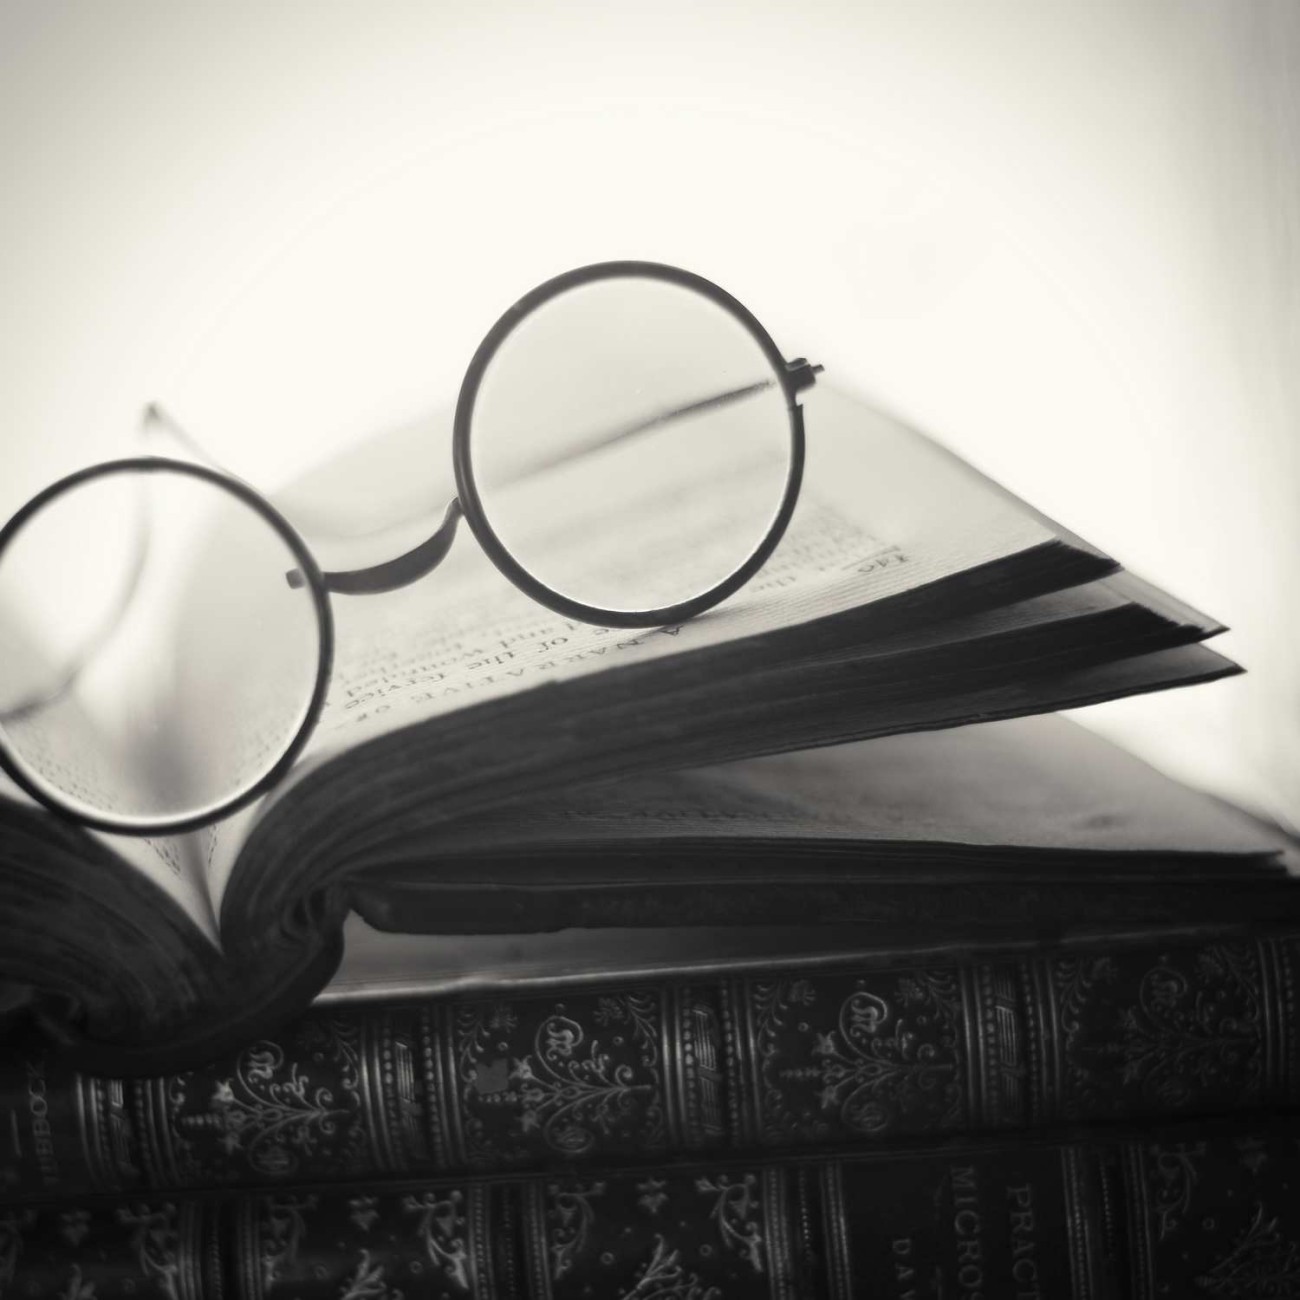 Books with round glasses, 2015